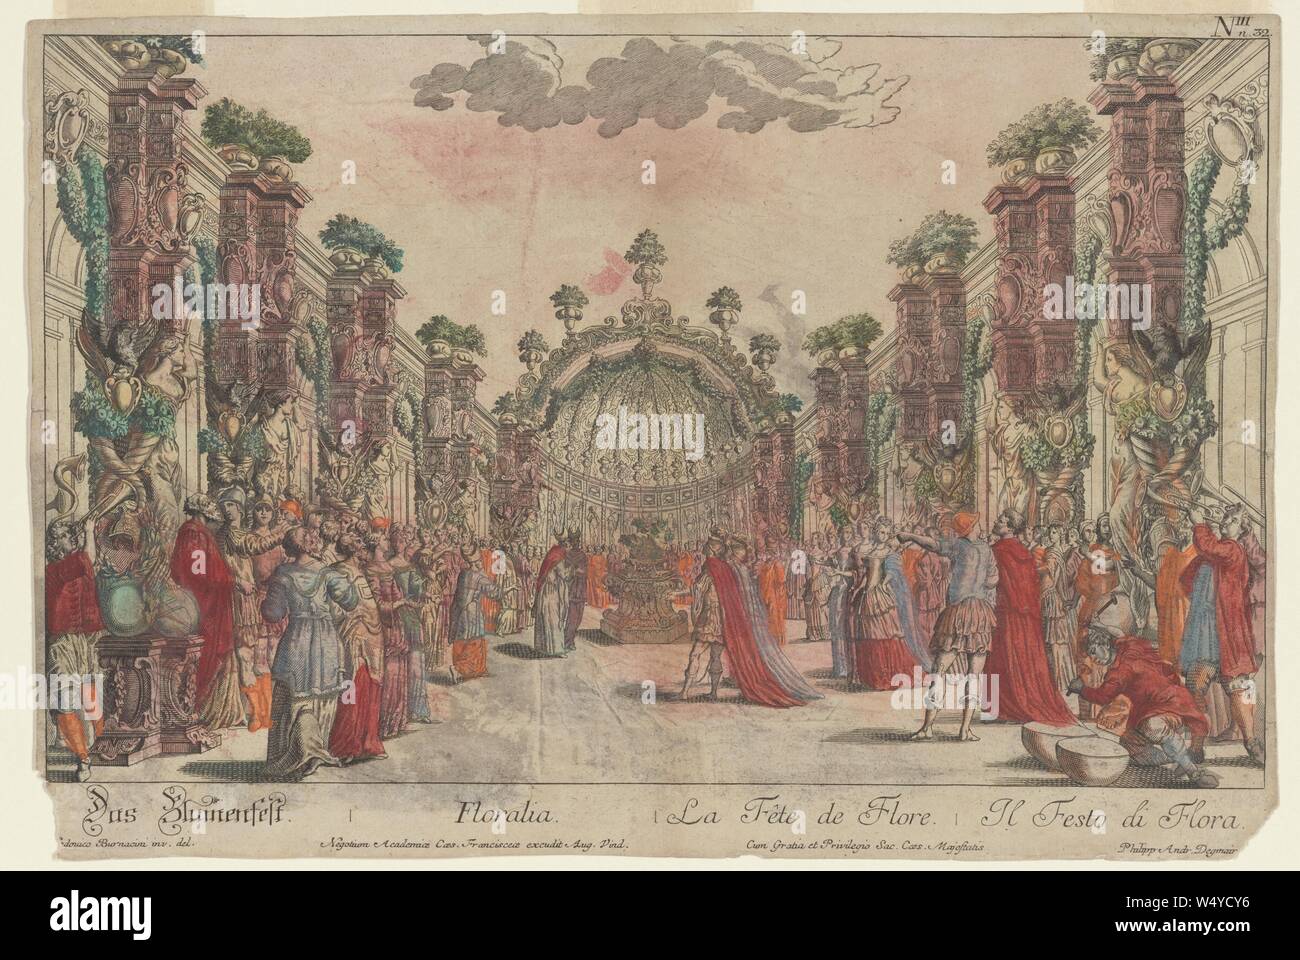 Drawing of the Floralia, a festival in ancient Roman religious practice in honor of the goddess Flora, by Lodovico Ottavio Burnacini, 1650. From the New York Public Library. () Stock Photo